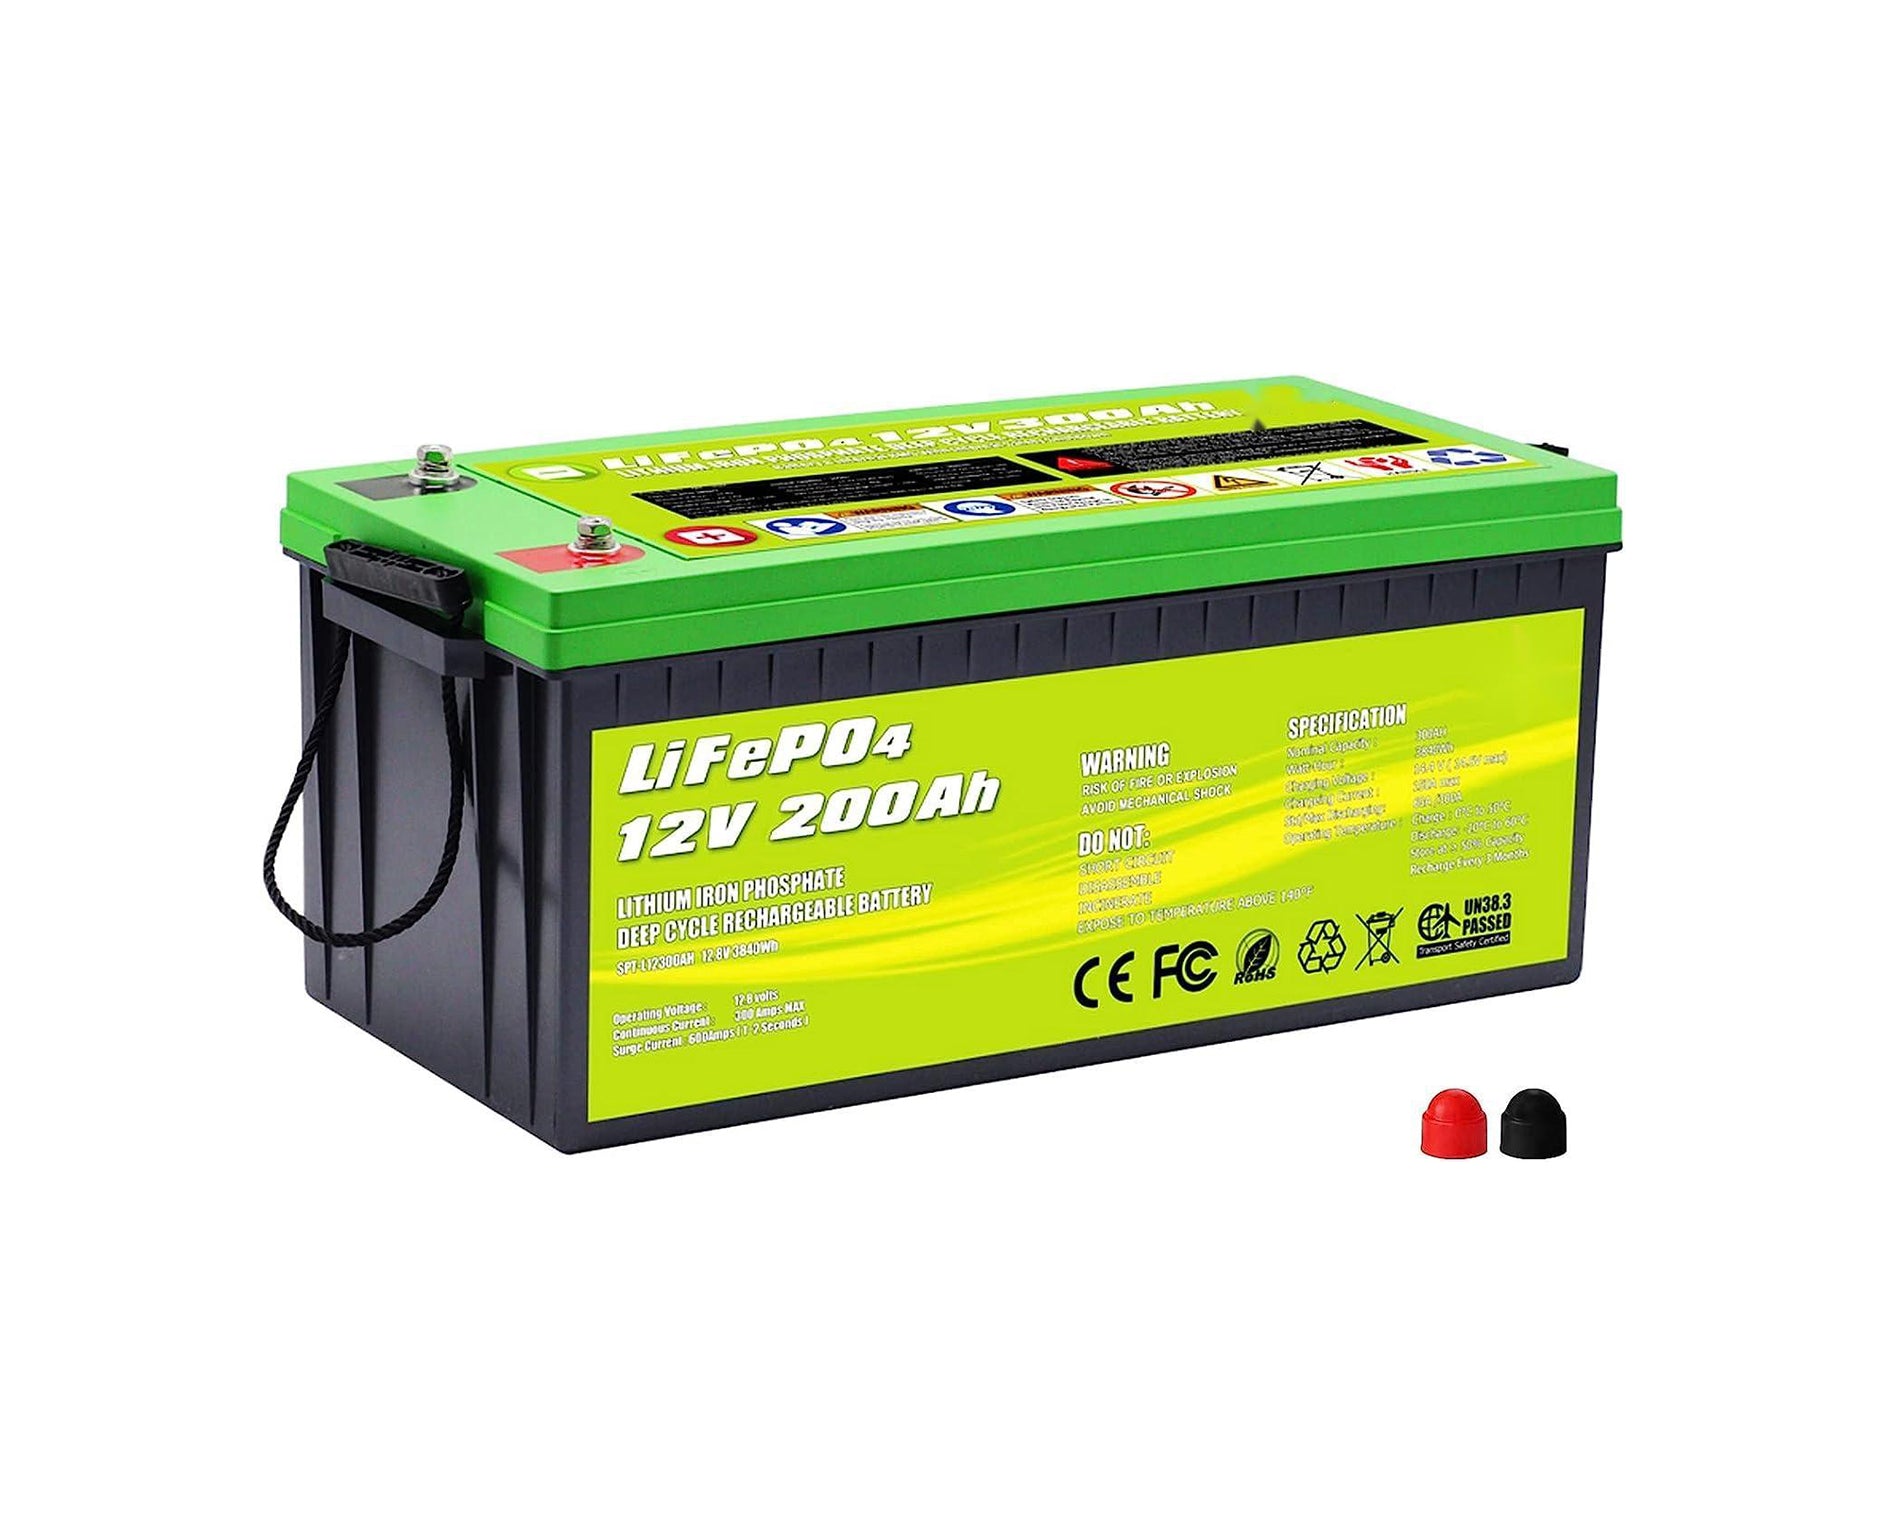 12V 400AH Deep Cycle Lithium ion Battery Pack/Lifepo4 - Flykol